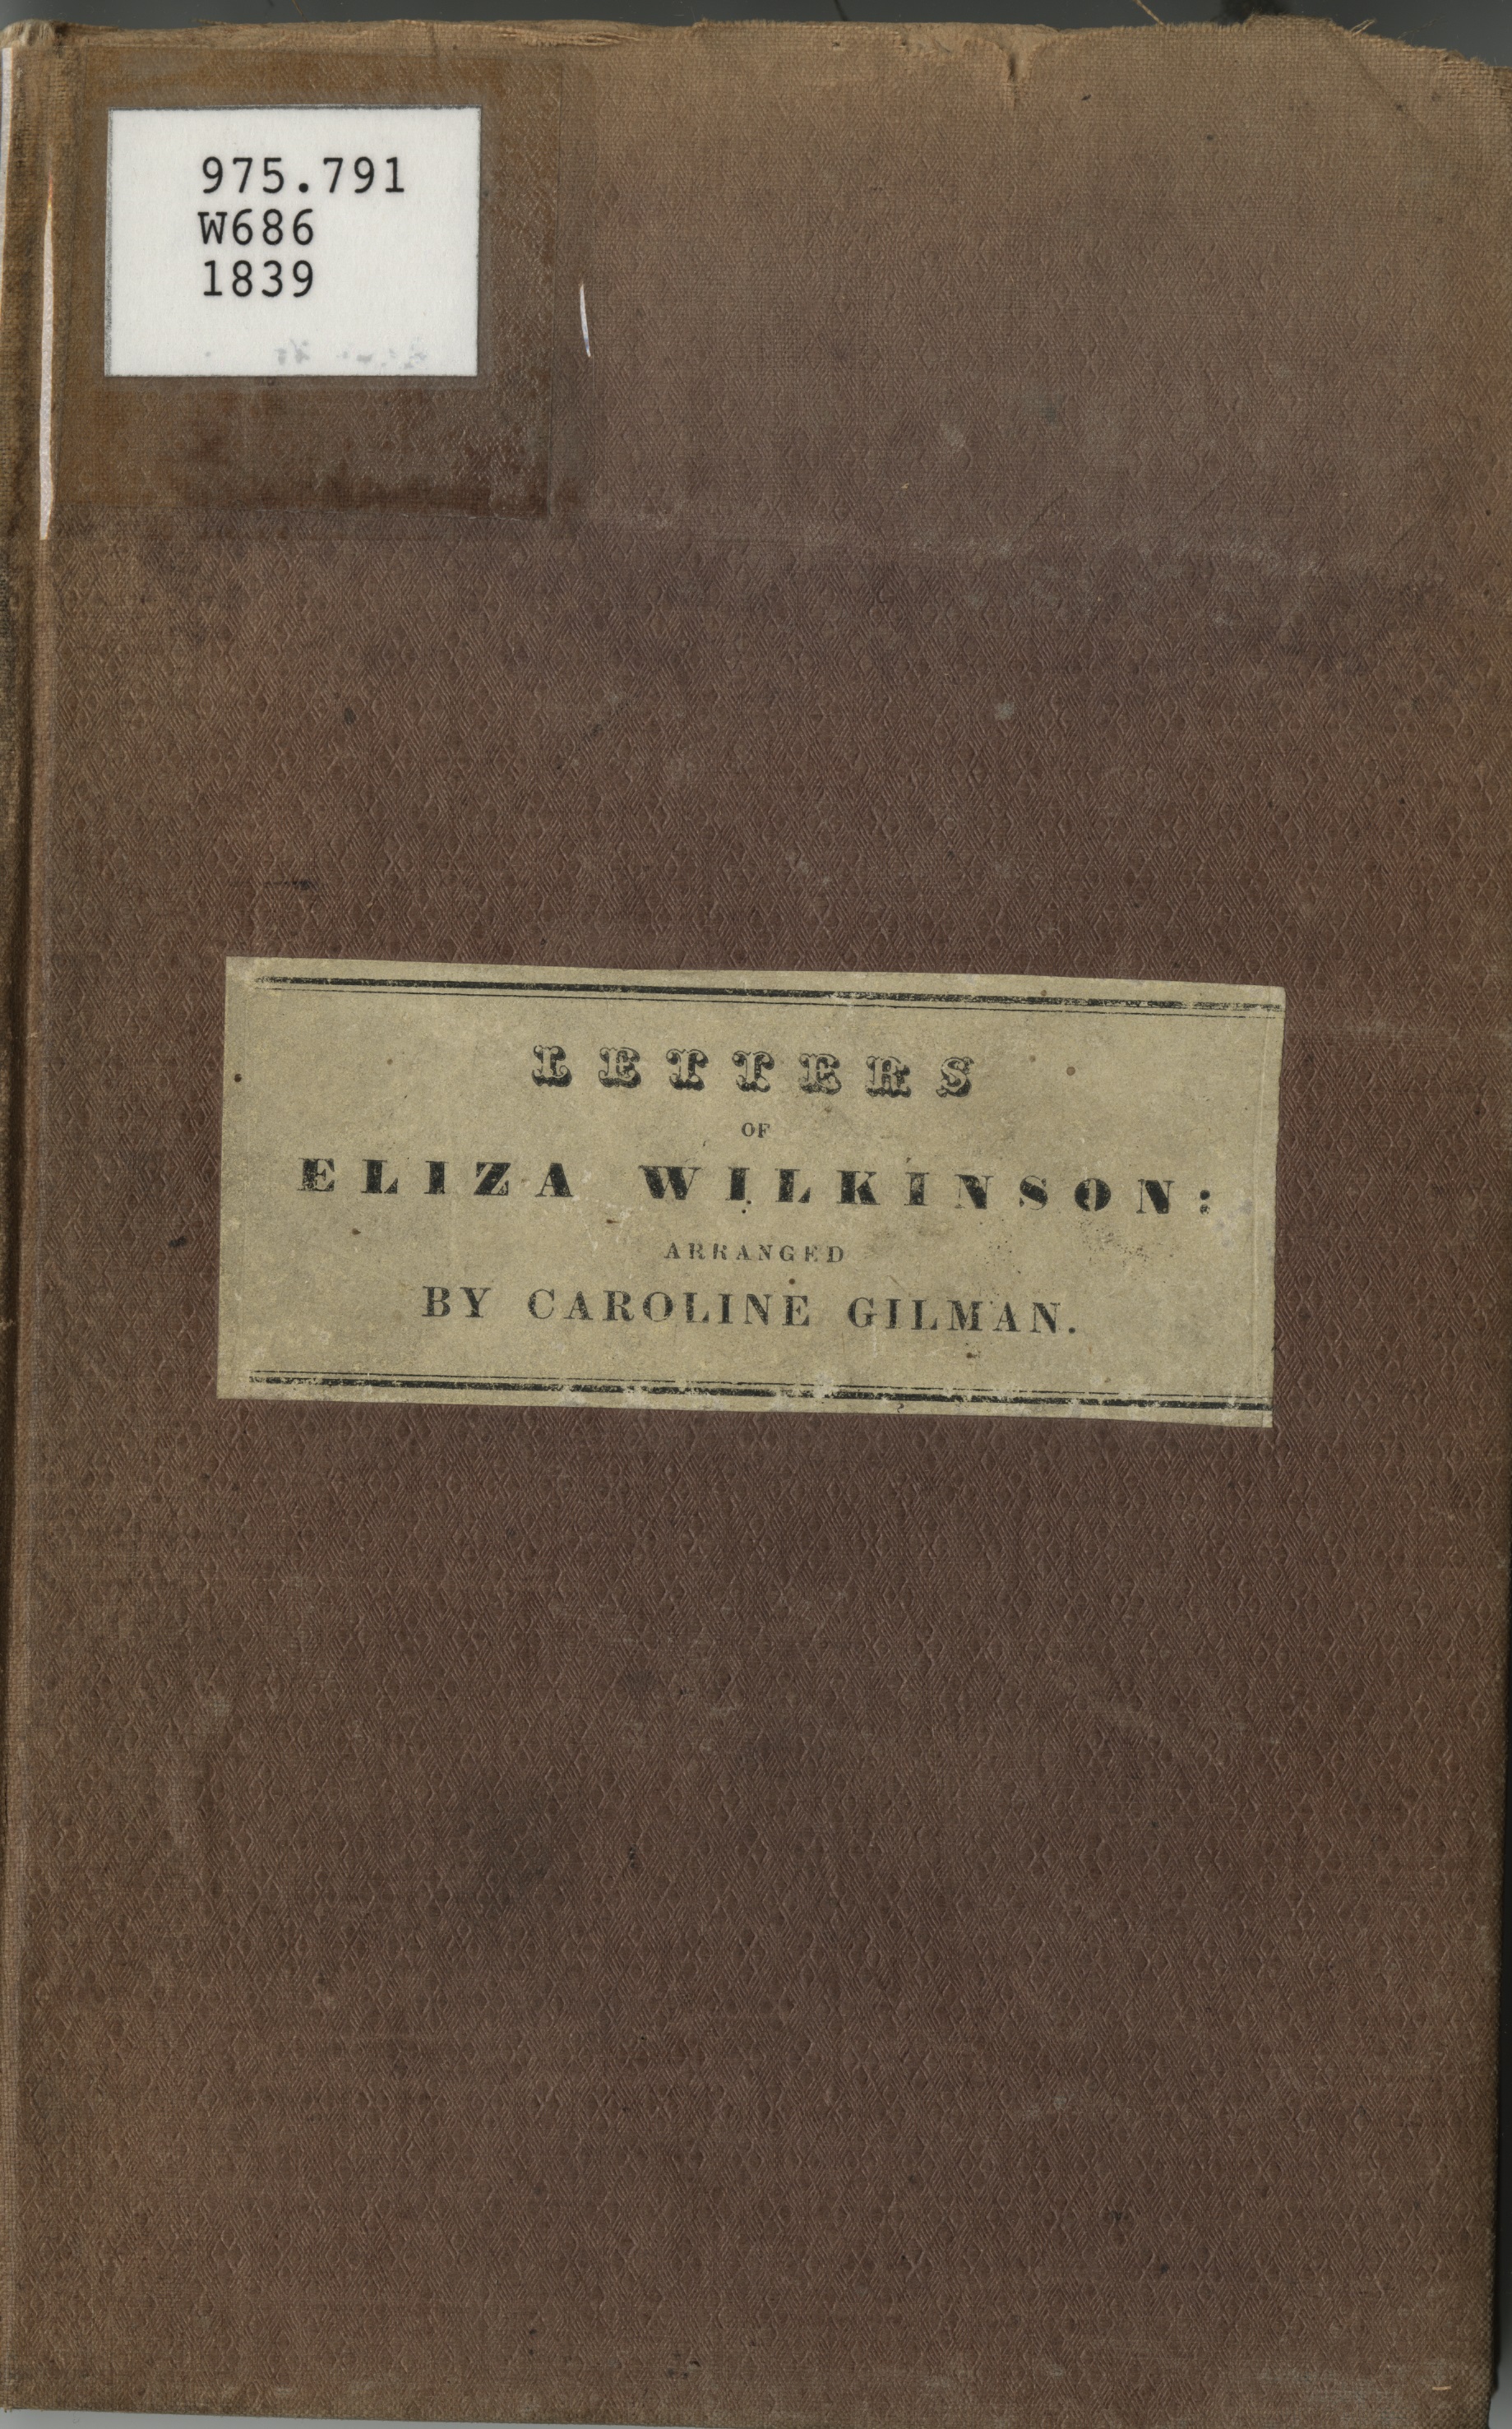 Letters of Eliza Wilkinson: during the invasion and possession of Charleston, S.C., by the British in the revolutionary war by Eliza Wilkinson and Caroline Howard Graham, 1839